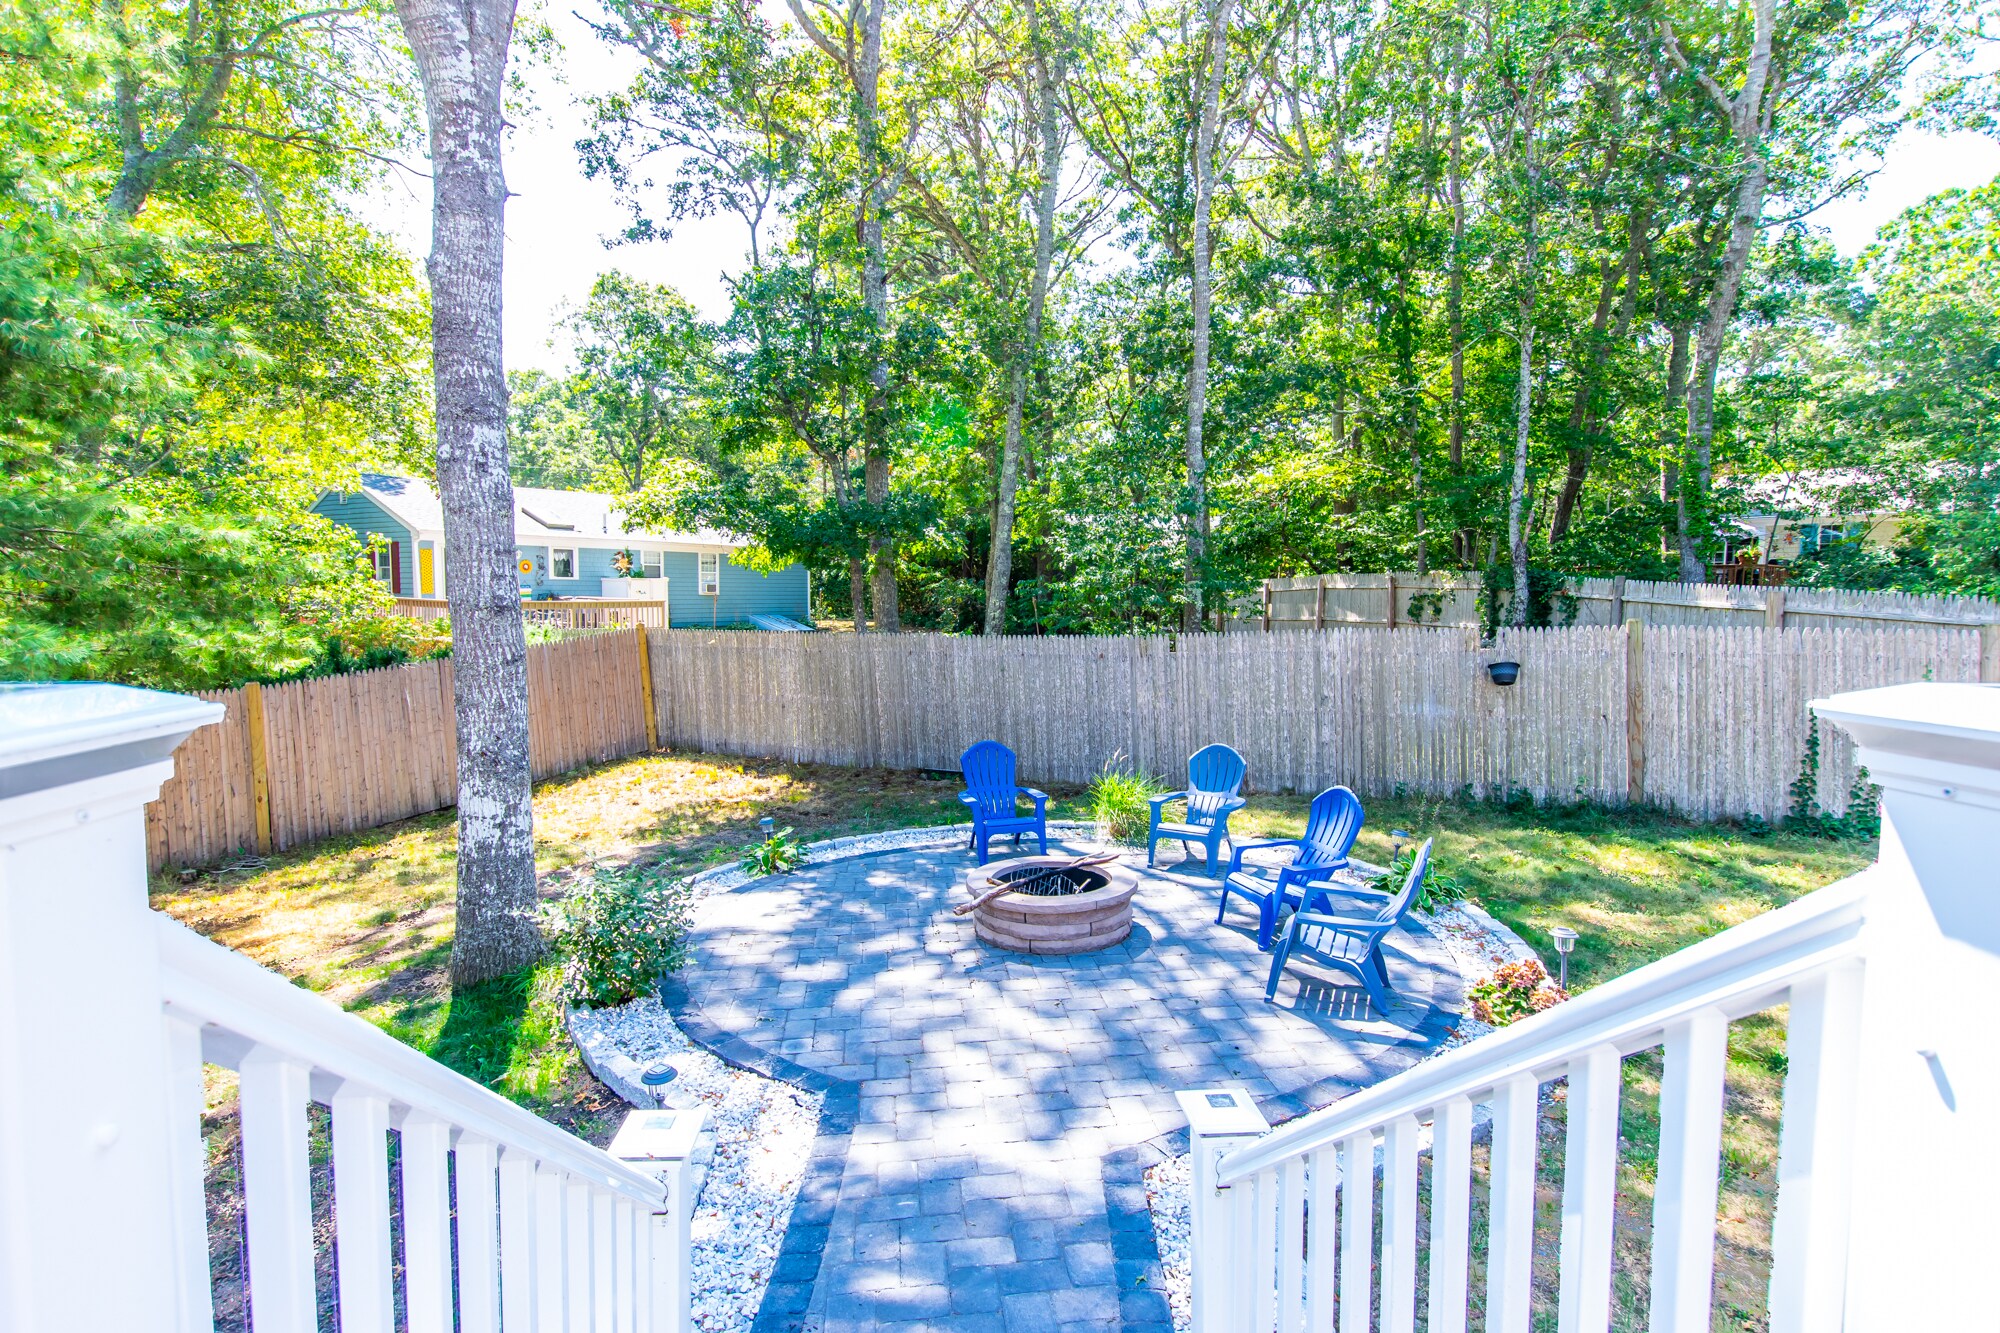 Property Image 1 - 21007: Finished Walkout Basement, Fully Fenced Private Yard, New Fire Pit Area, Central A/C!